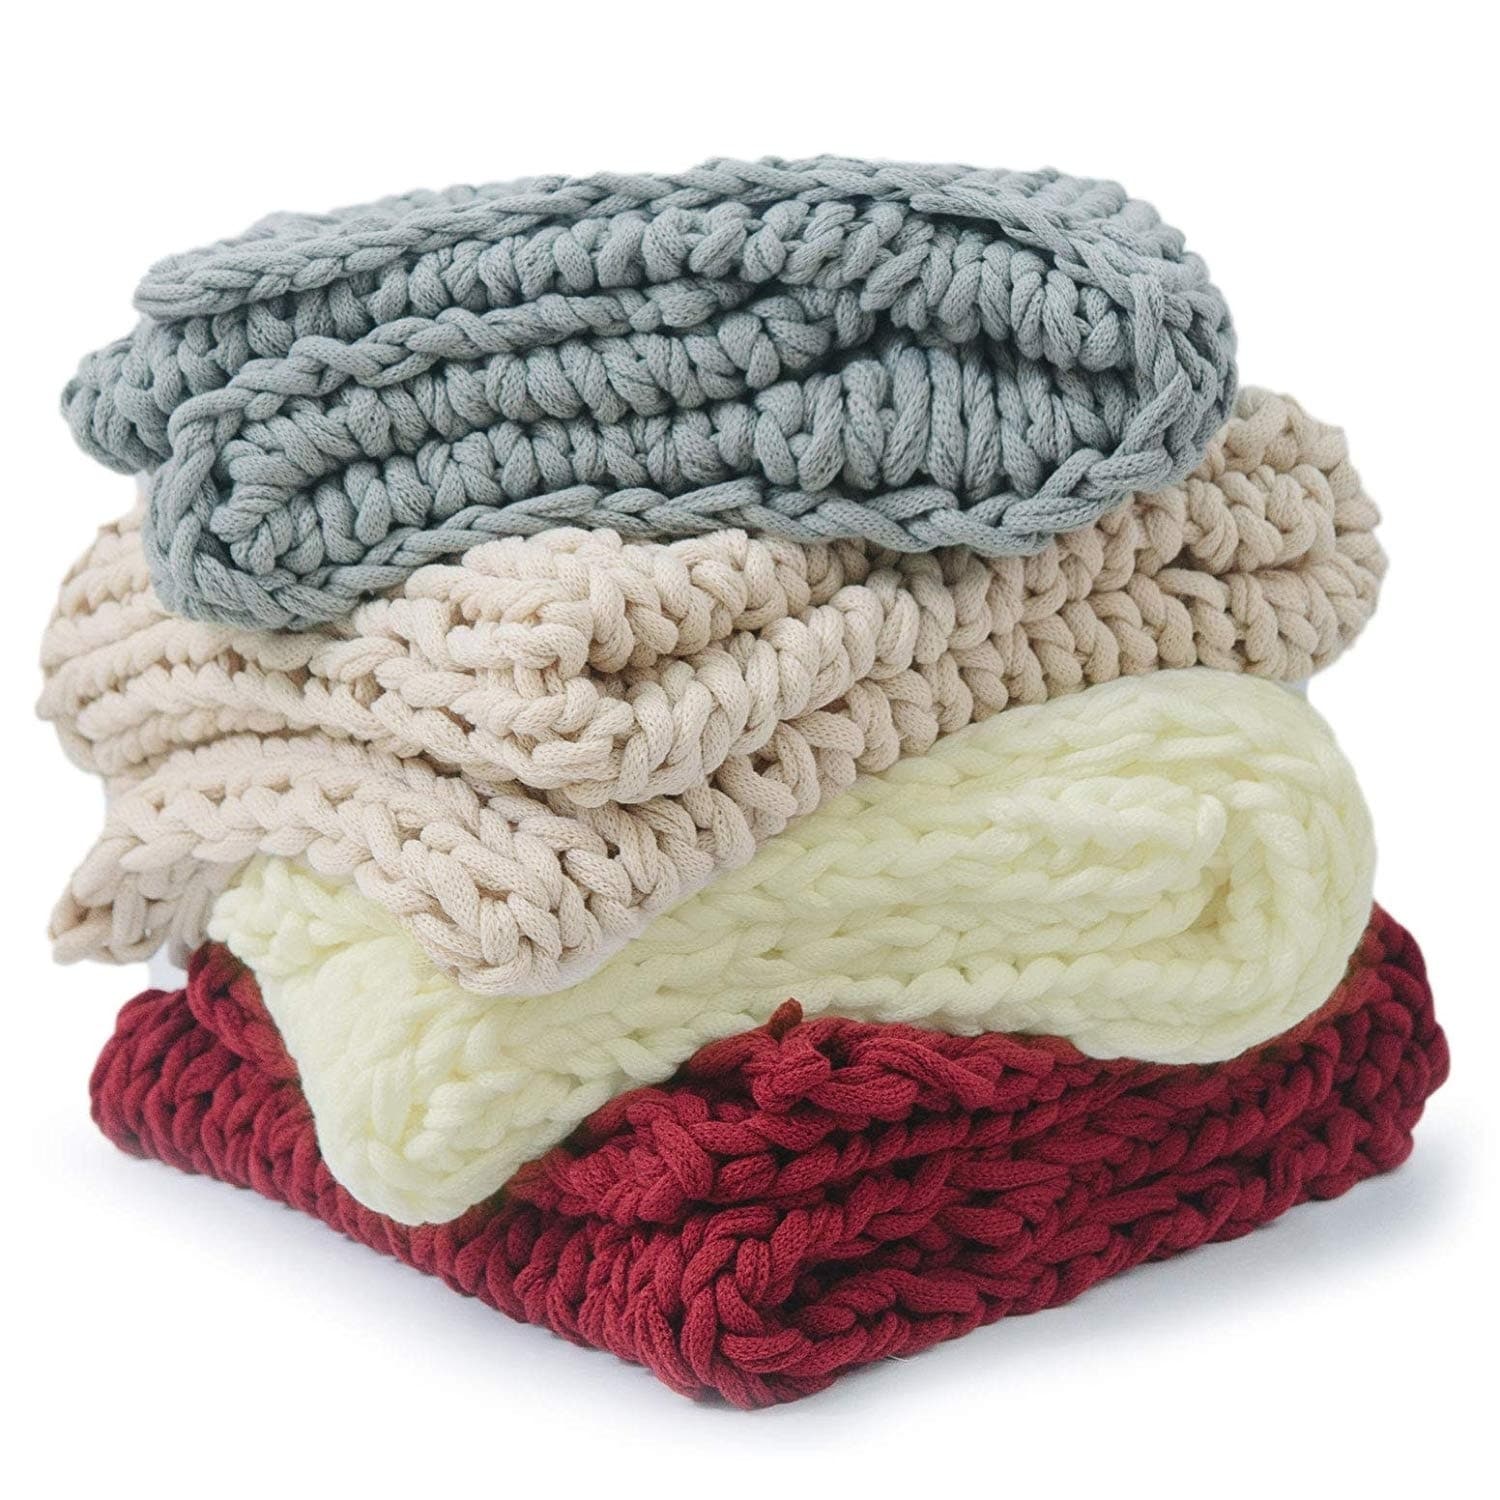 Cheer Collection Ultra Plush And Soft Chunky Cable Knit Throw Blanket On Sale Overstock 24168632